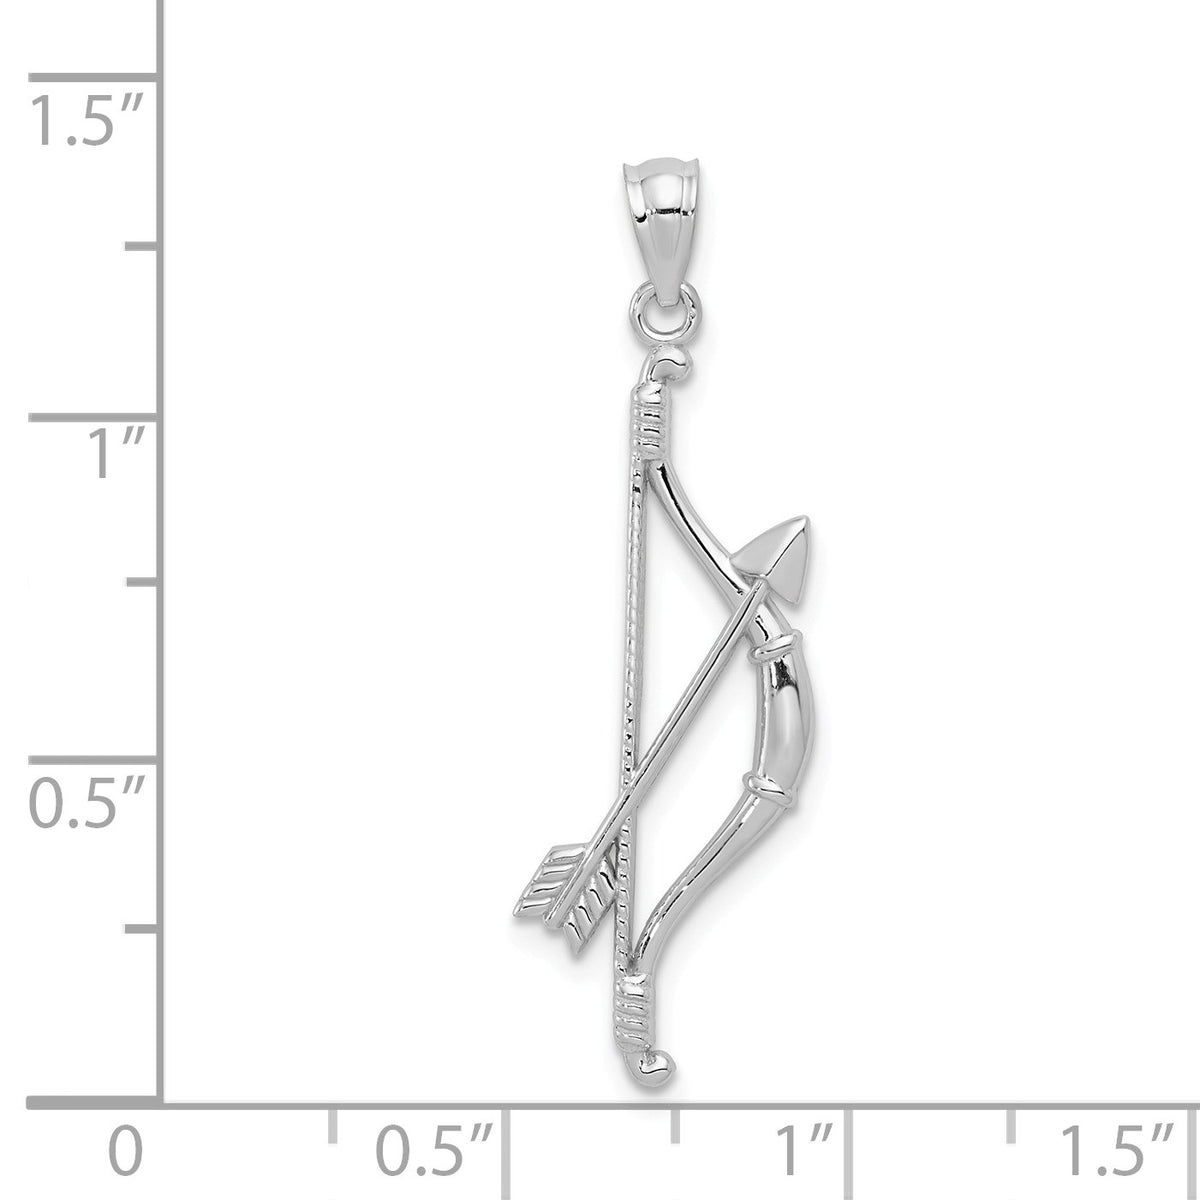 Alternate view of the 14k White Gold Open Back Bow and Arrow Pendant, 11 x 36mm by The Black Bow Jewelry Co.